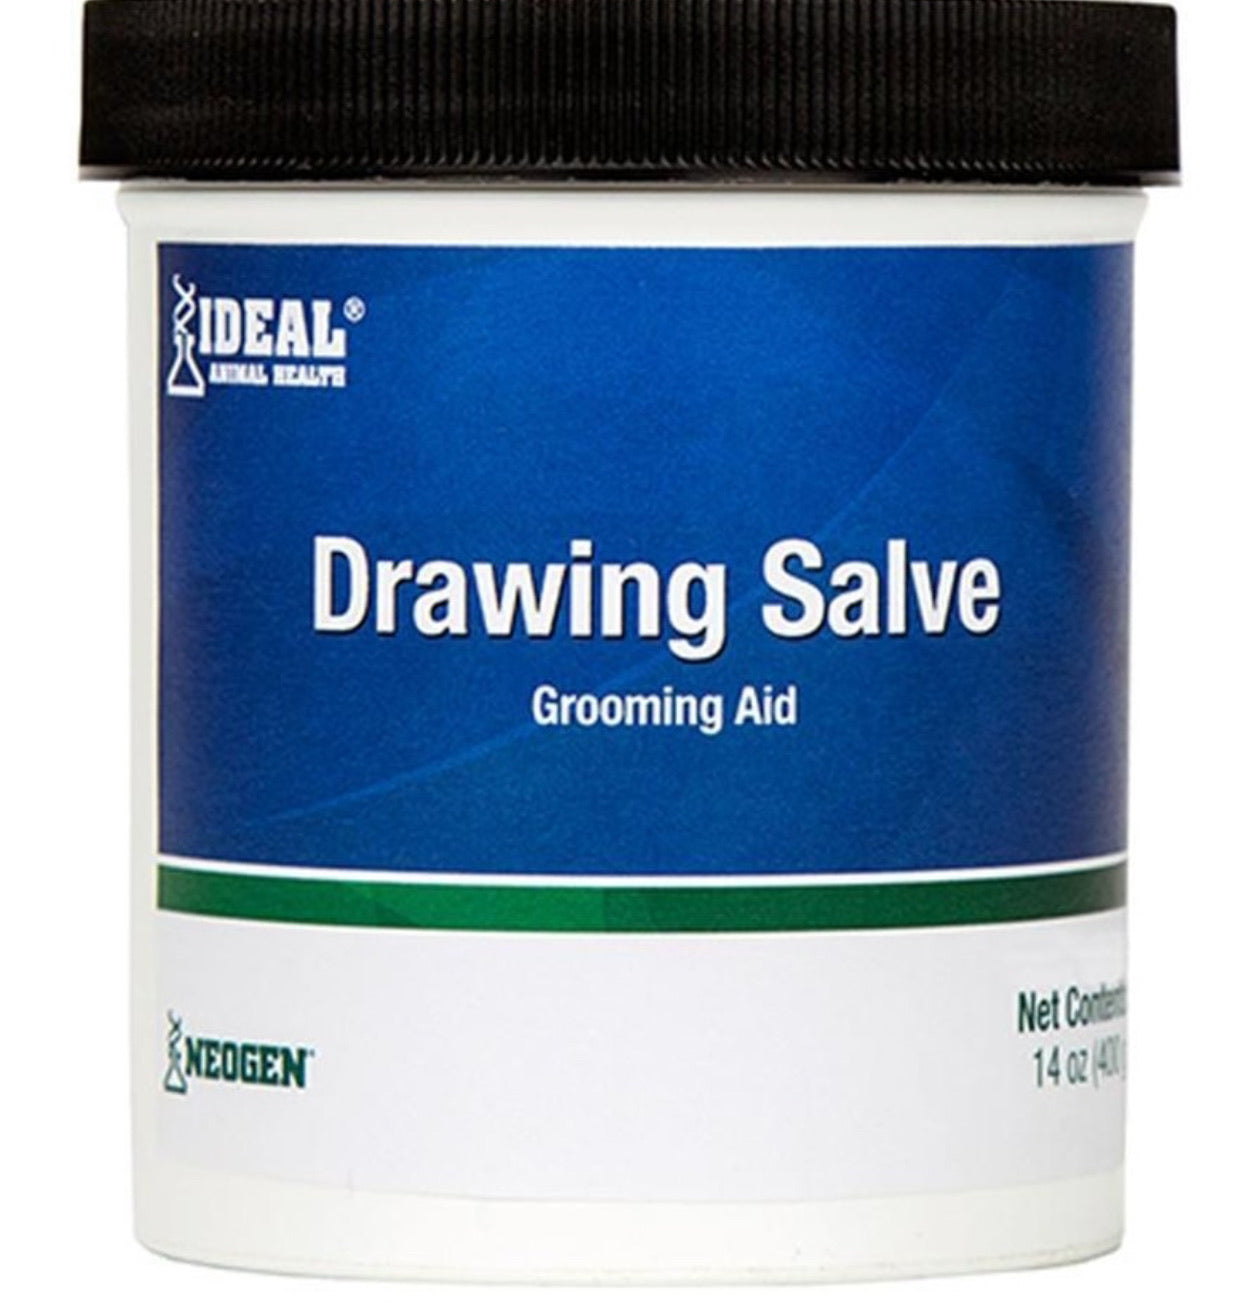 Squire Ichthammol Drawing Salve Grooming Aid